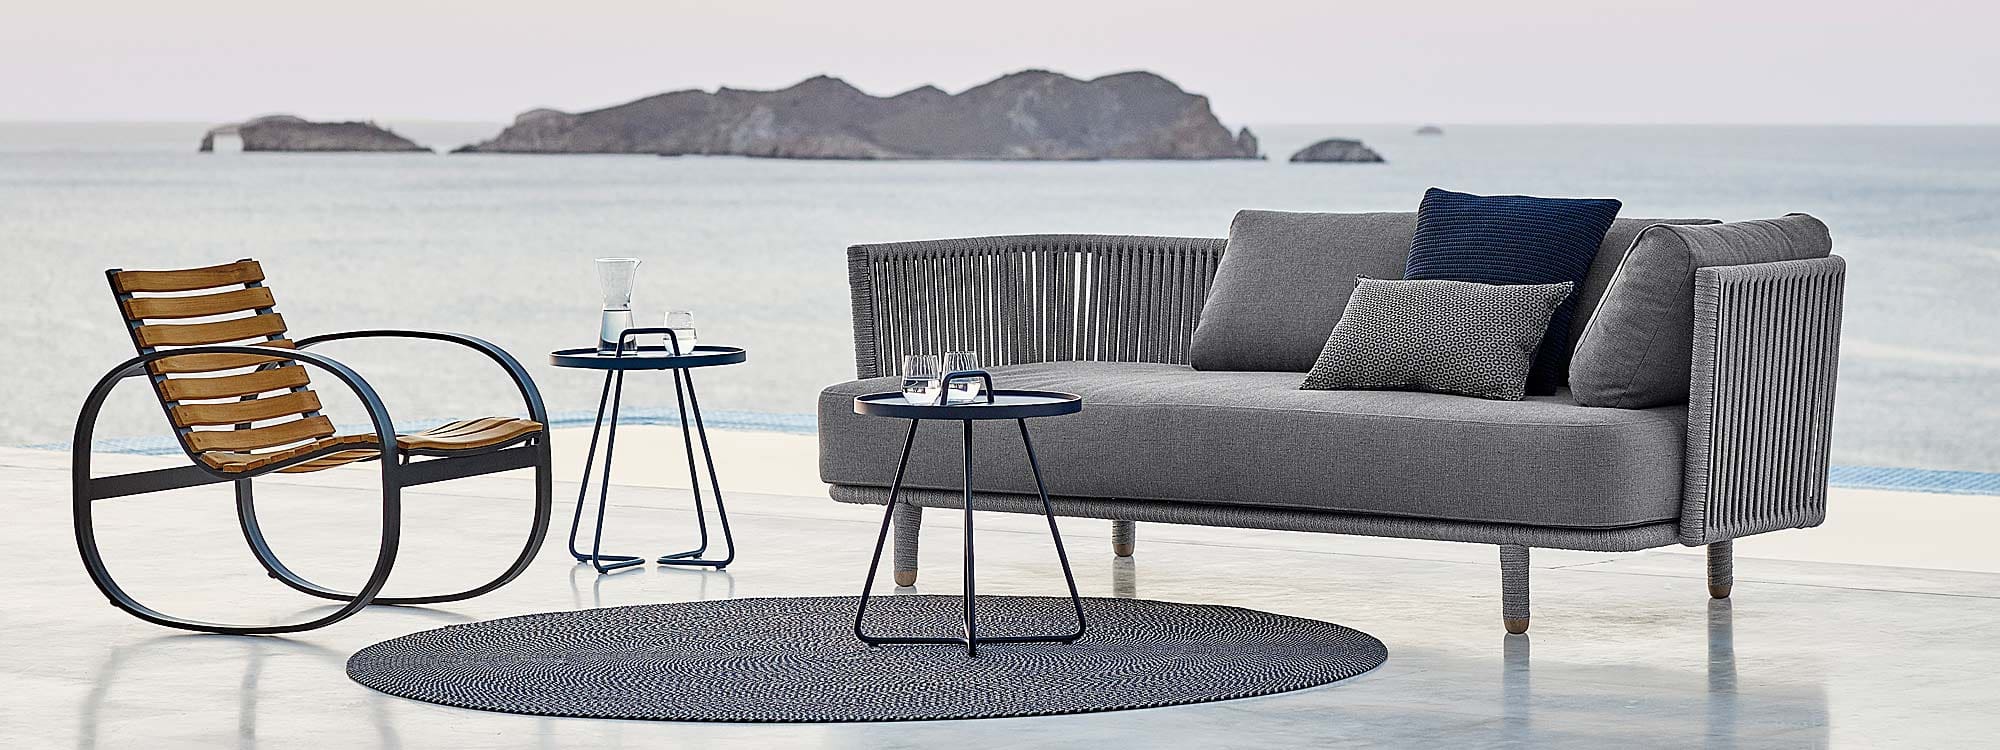 Image of terrace at dusk with Moments 2 seat outdoor sofa and On The Move side tables by Cane-line